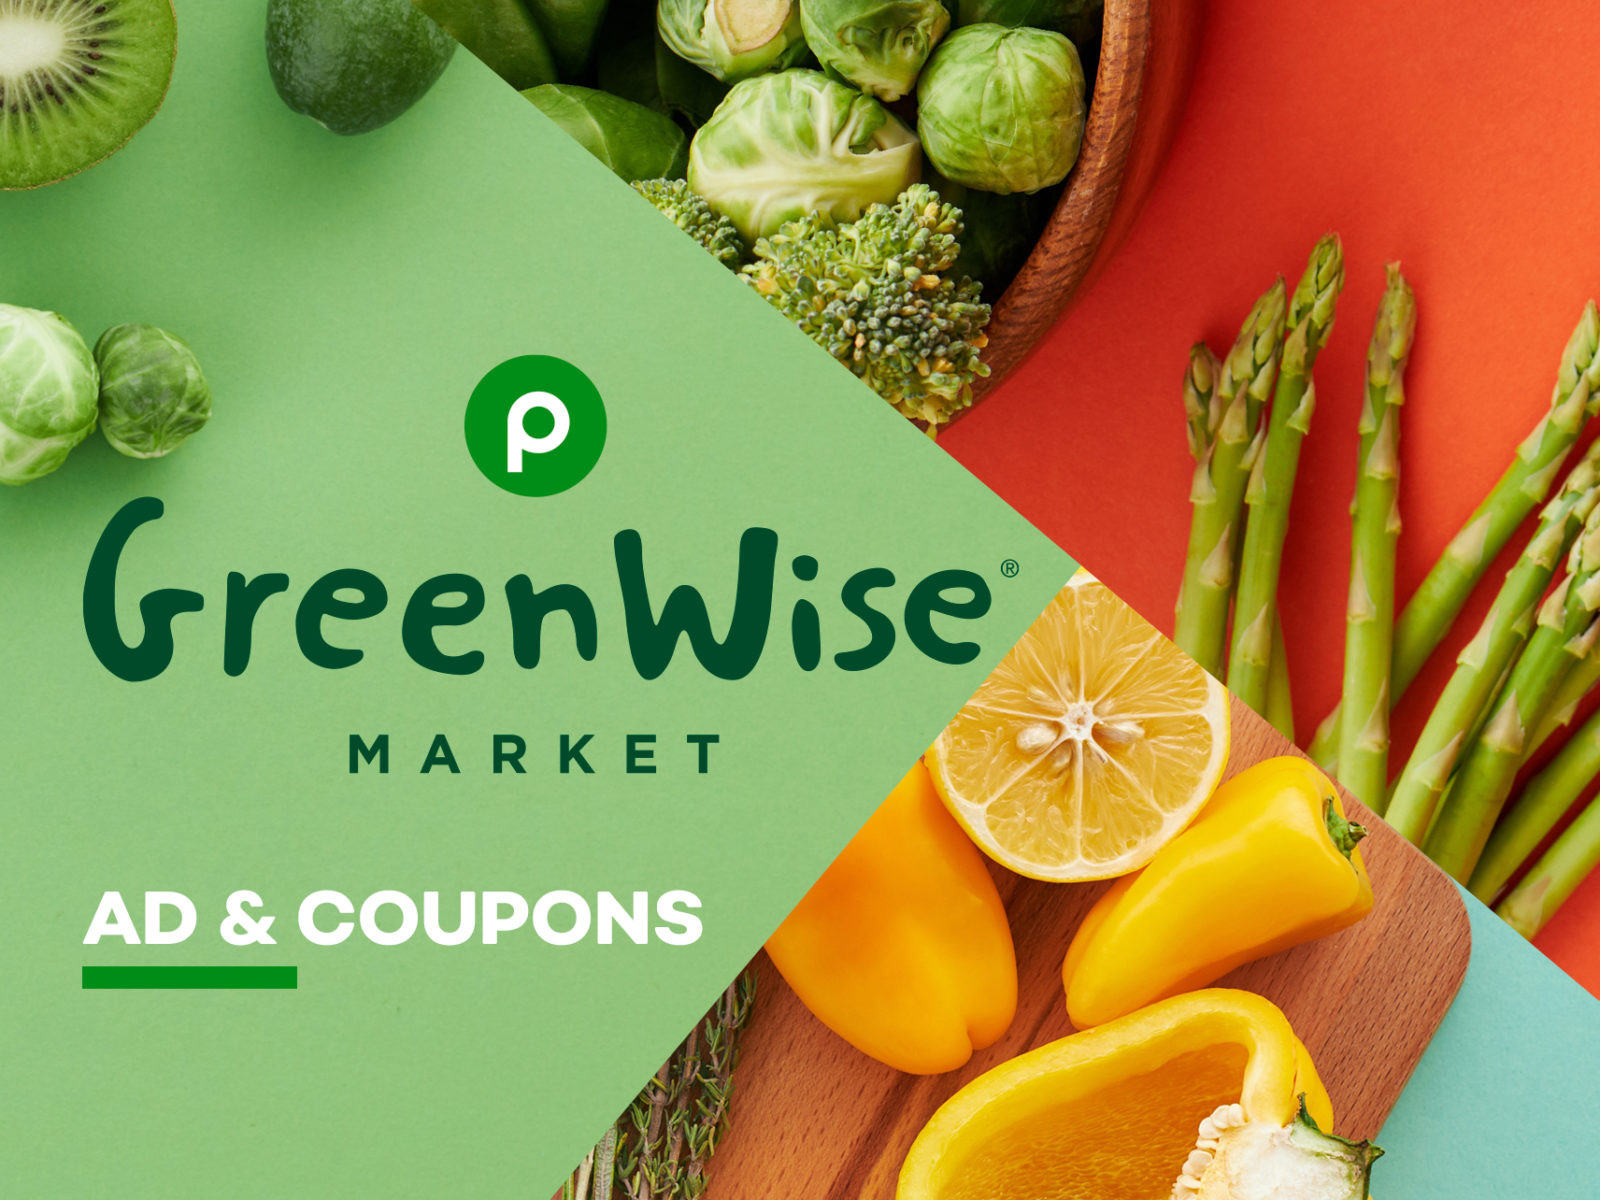 Publix GreenWise Market Ad & Coupons Week Of 10/26 to 11/1 (10/25 to 10/31 For Some)